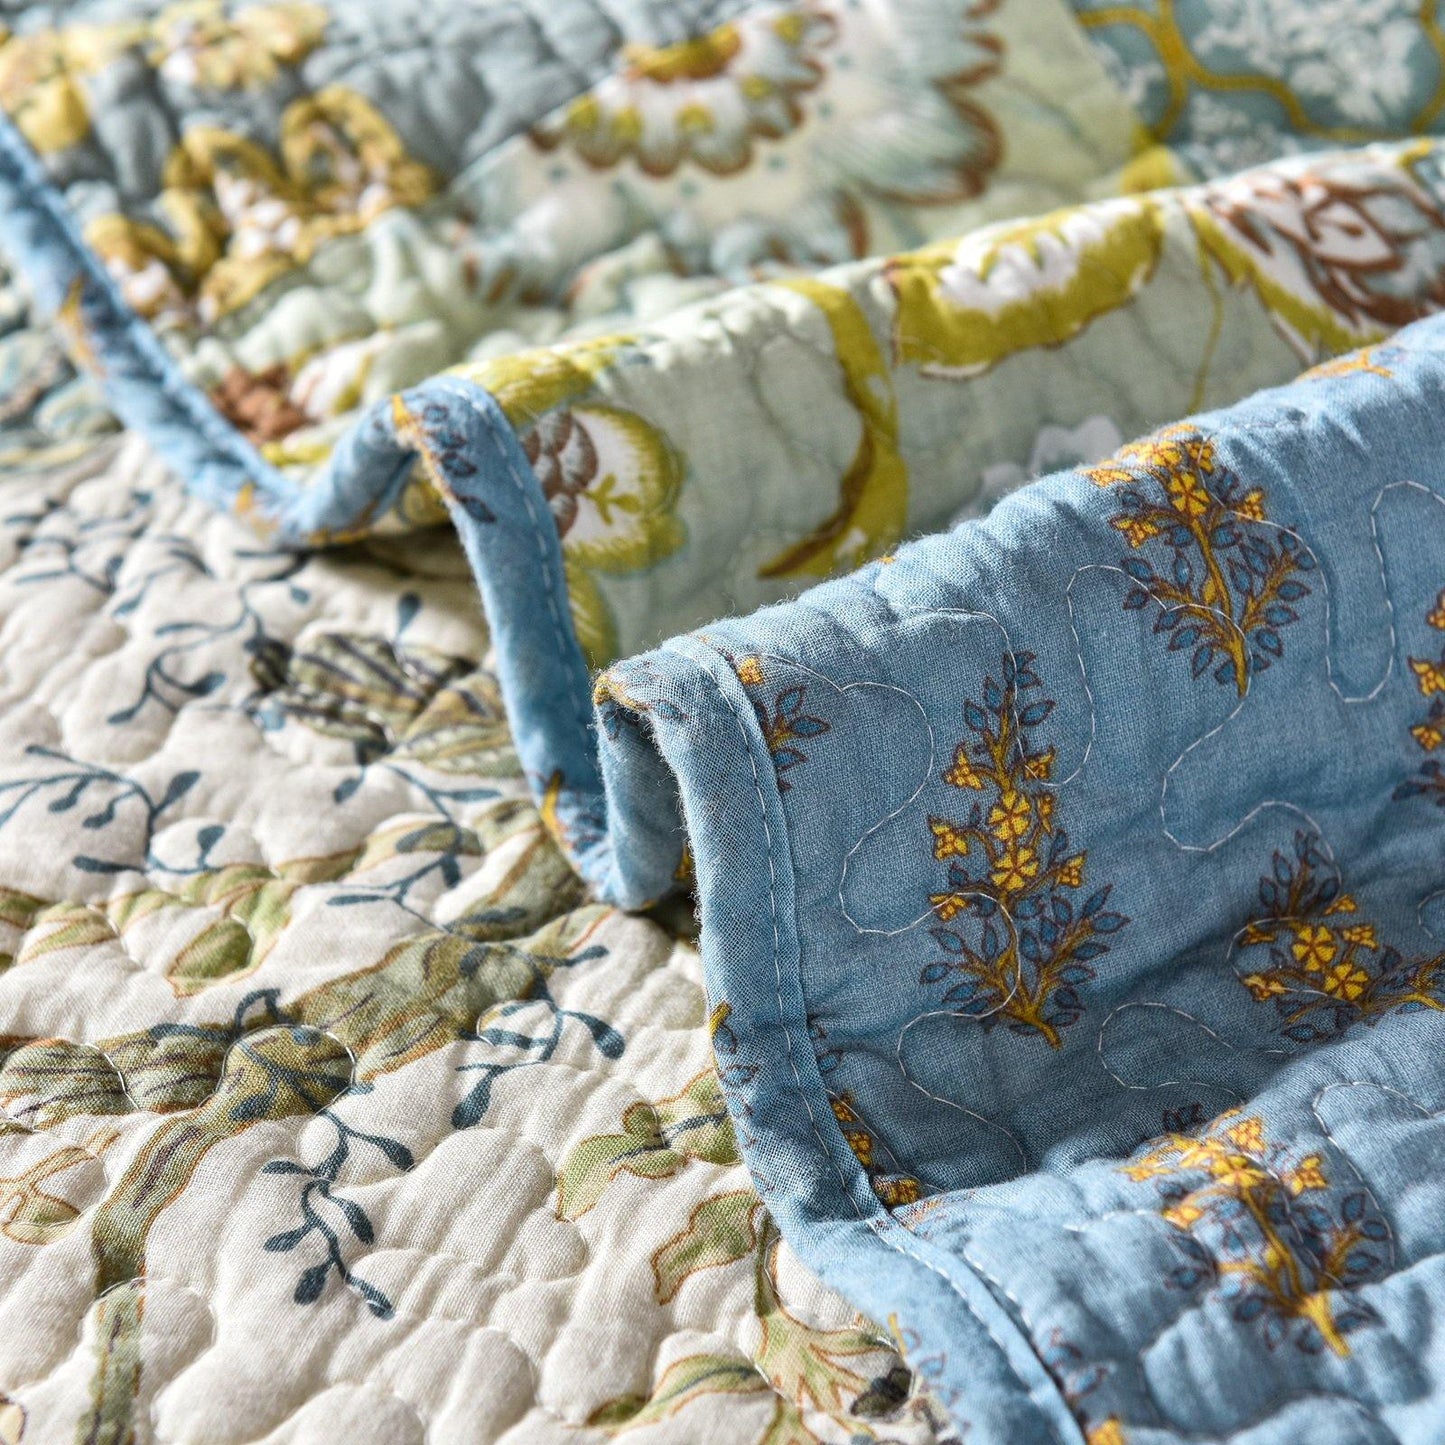 Bohemian floral stitching 3 Pieces Boho Quilt Set Coverlet with 2 Pillowcases - Wongs bedding